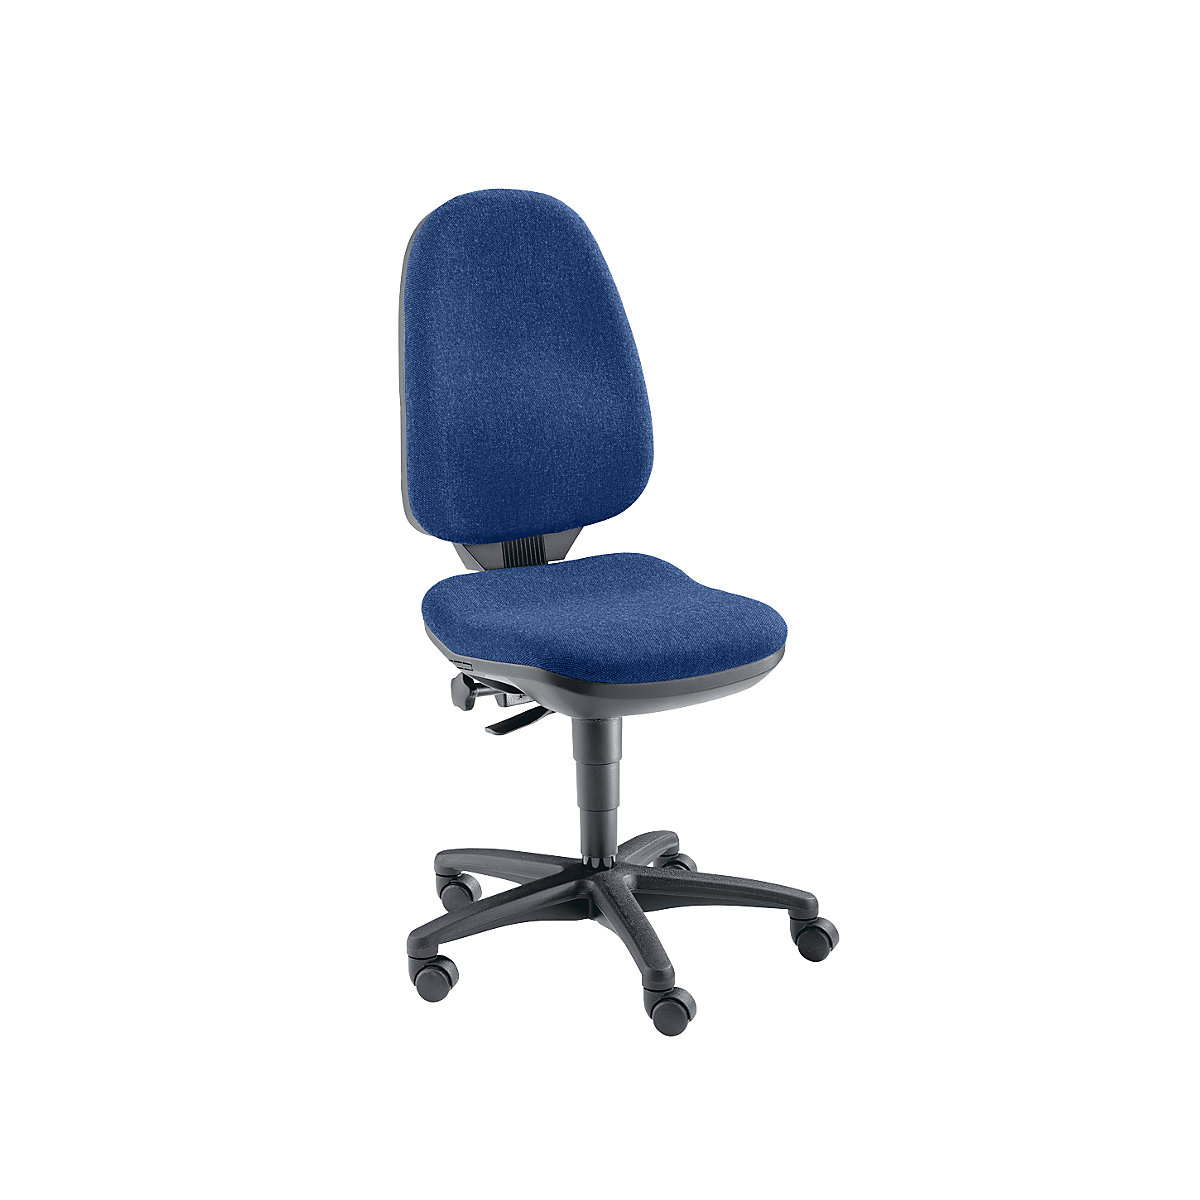 Ergonomic swivel chair – Topstar, without arm rests, fabric covering dark blue-2